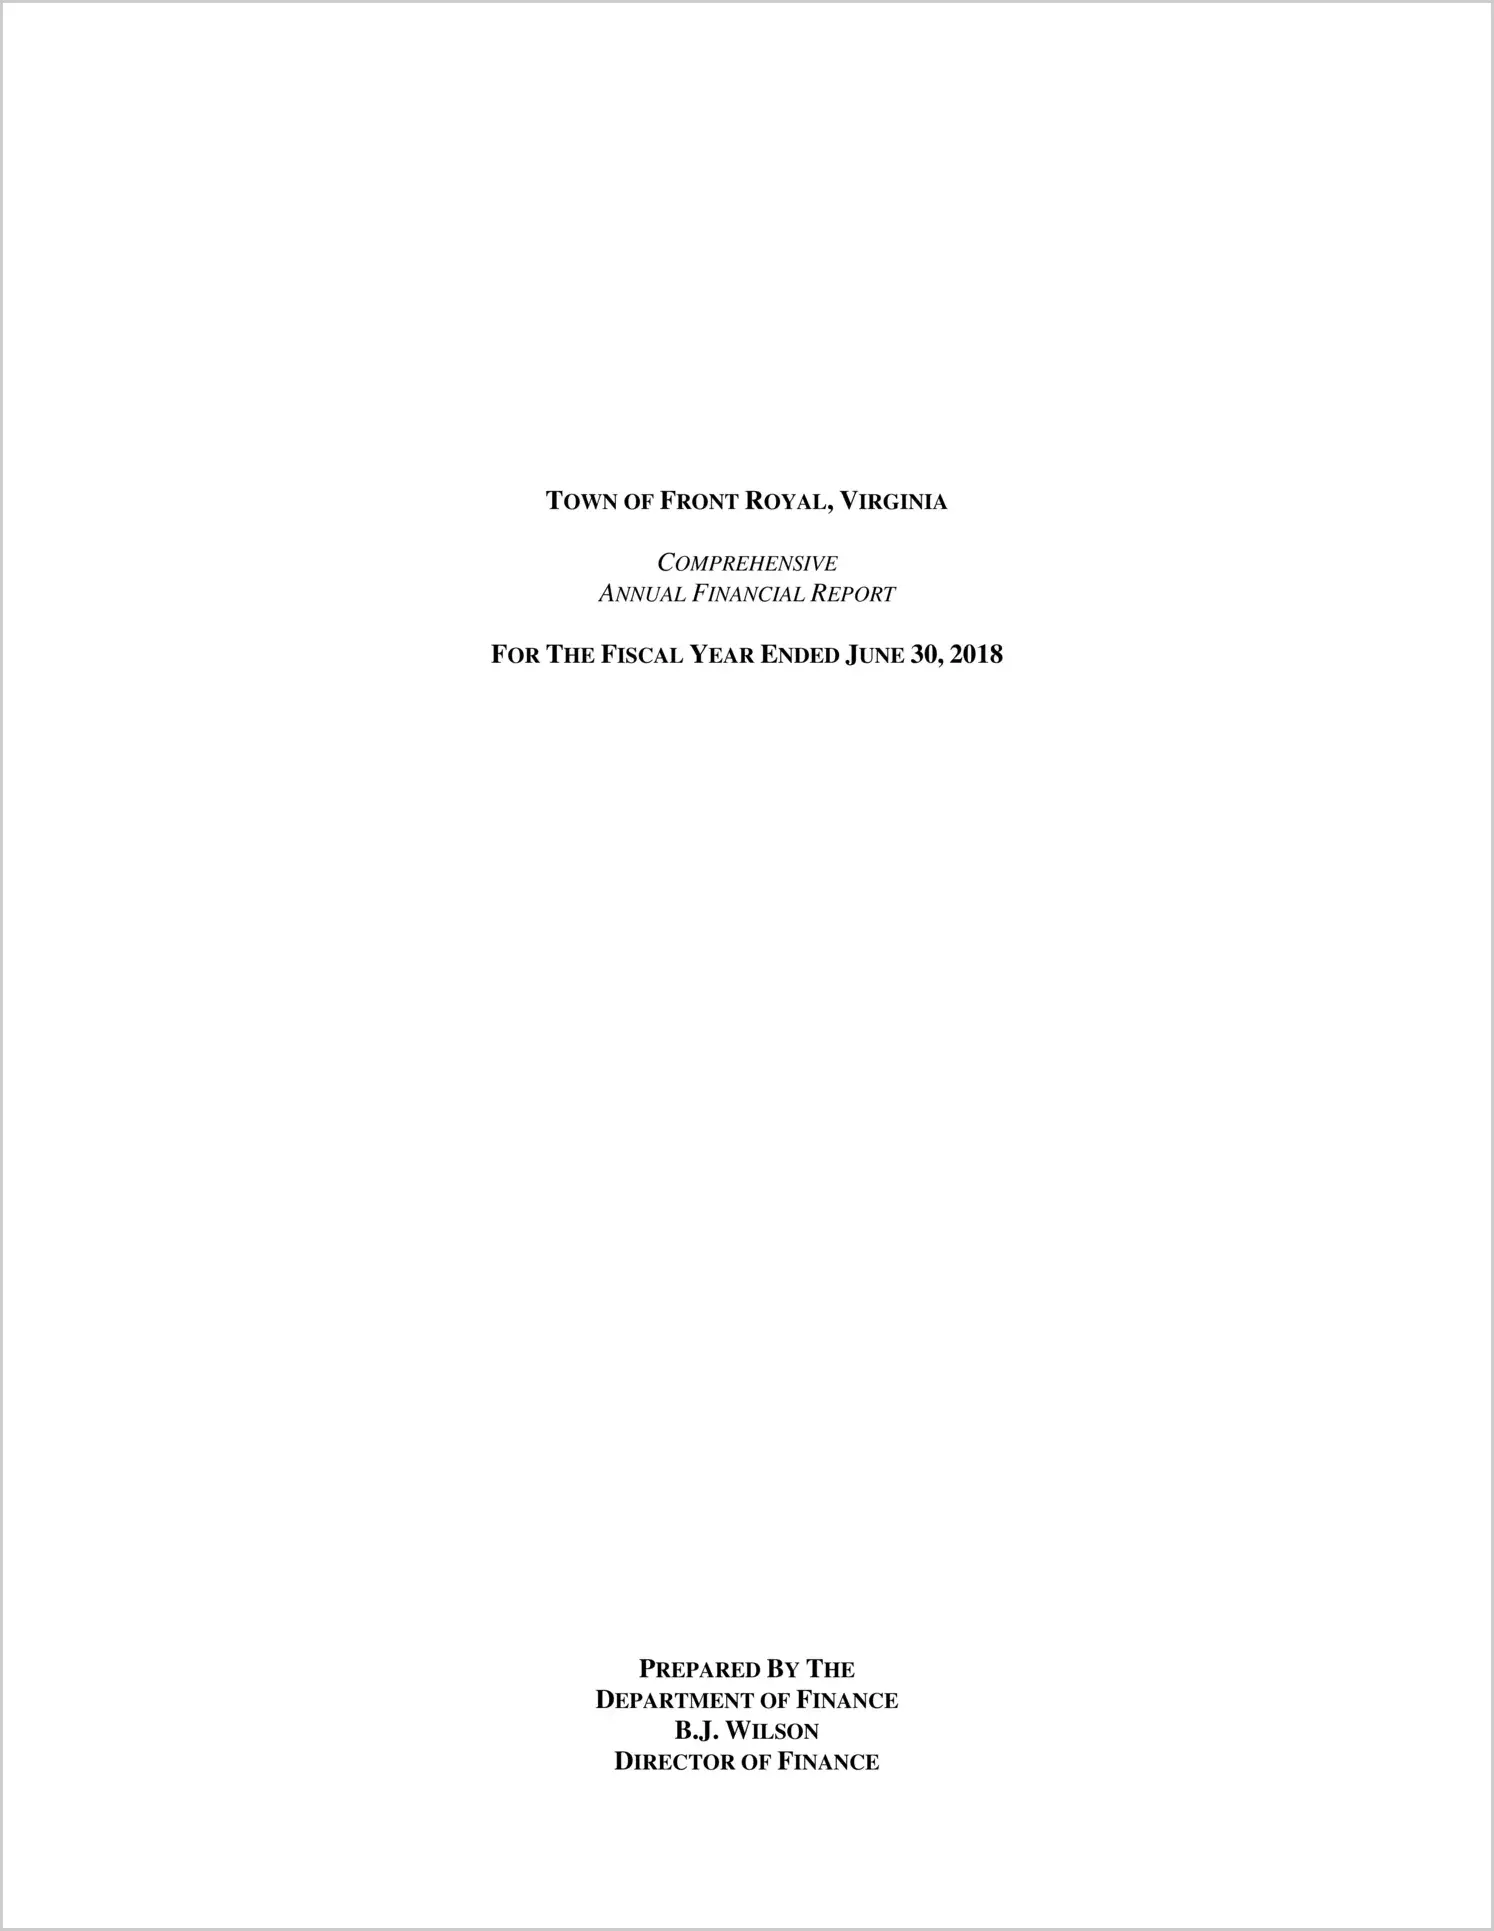 2018 Annual Financial Report for Town of Front Royal